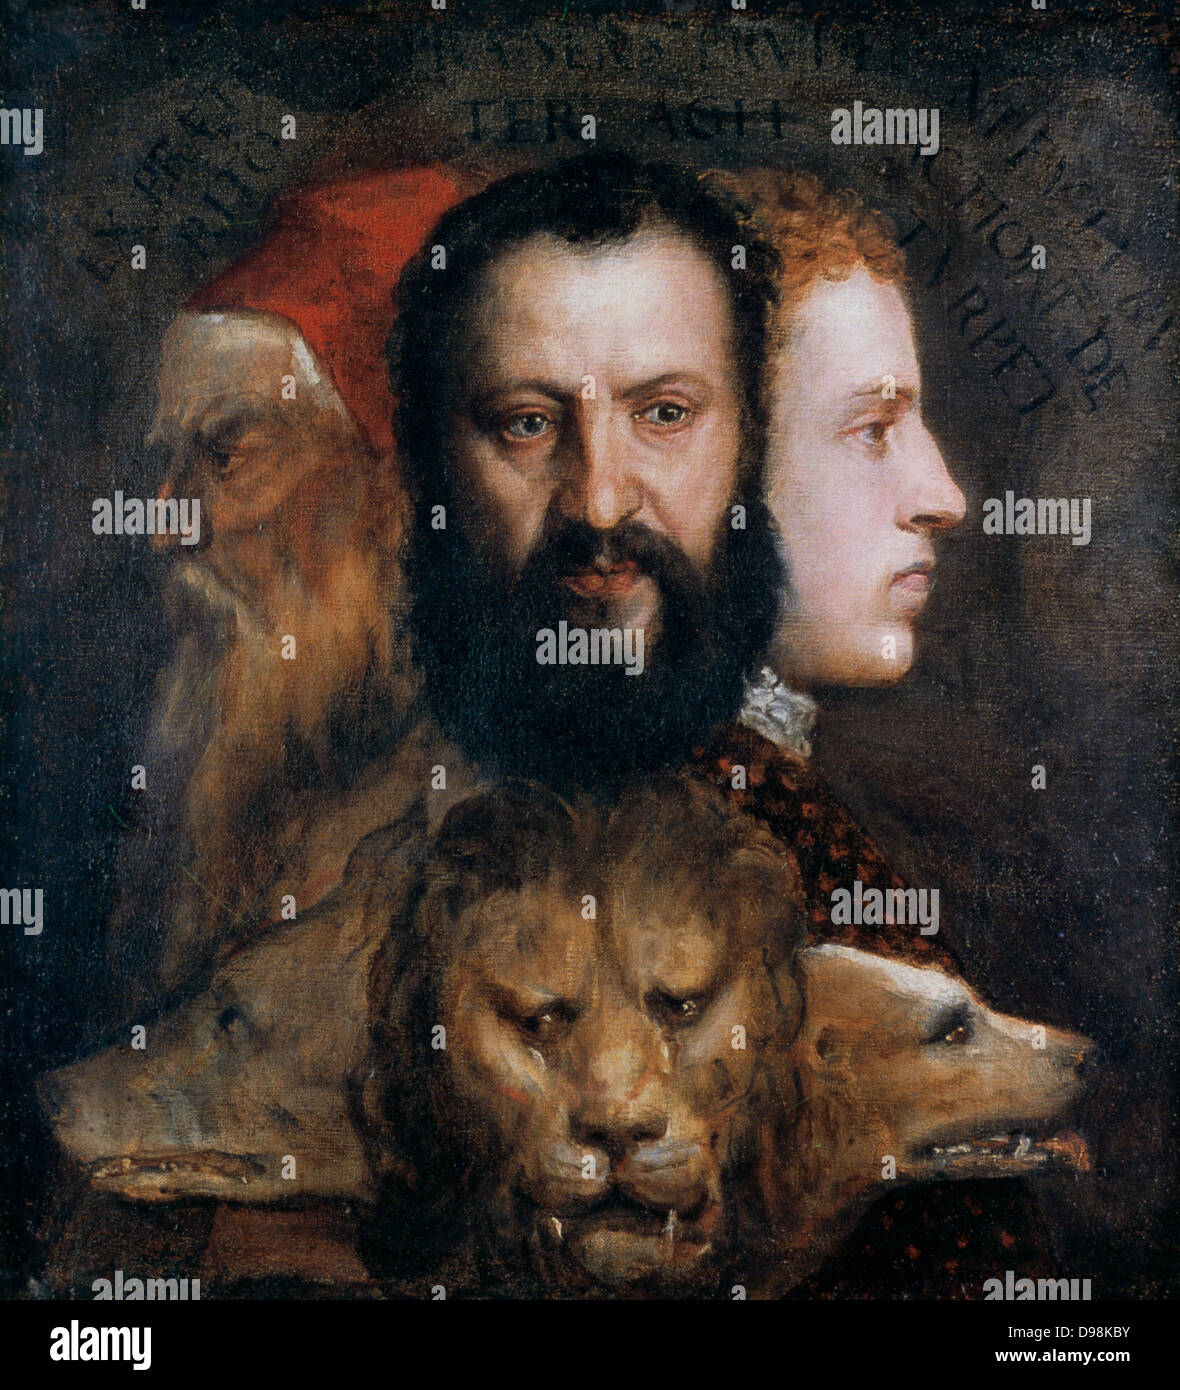 Allegory of Prudence' 1565-1575. Titian, an old man; Orazio, his son, full of vigour; Marco, his young nephew yet to make his mark. Tiziano Vecellio called Titian (c1488/1490-1576) leading painter of the Venetian school in Italian Renaissance. Stock Photo